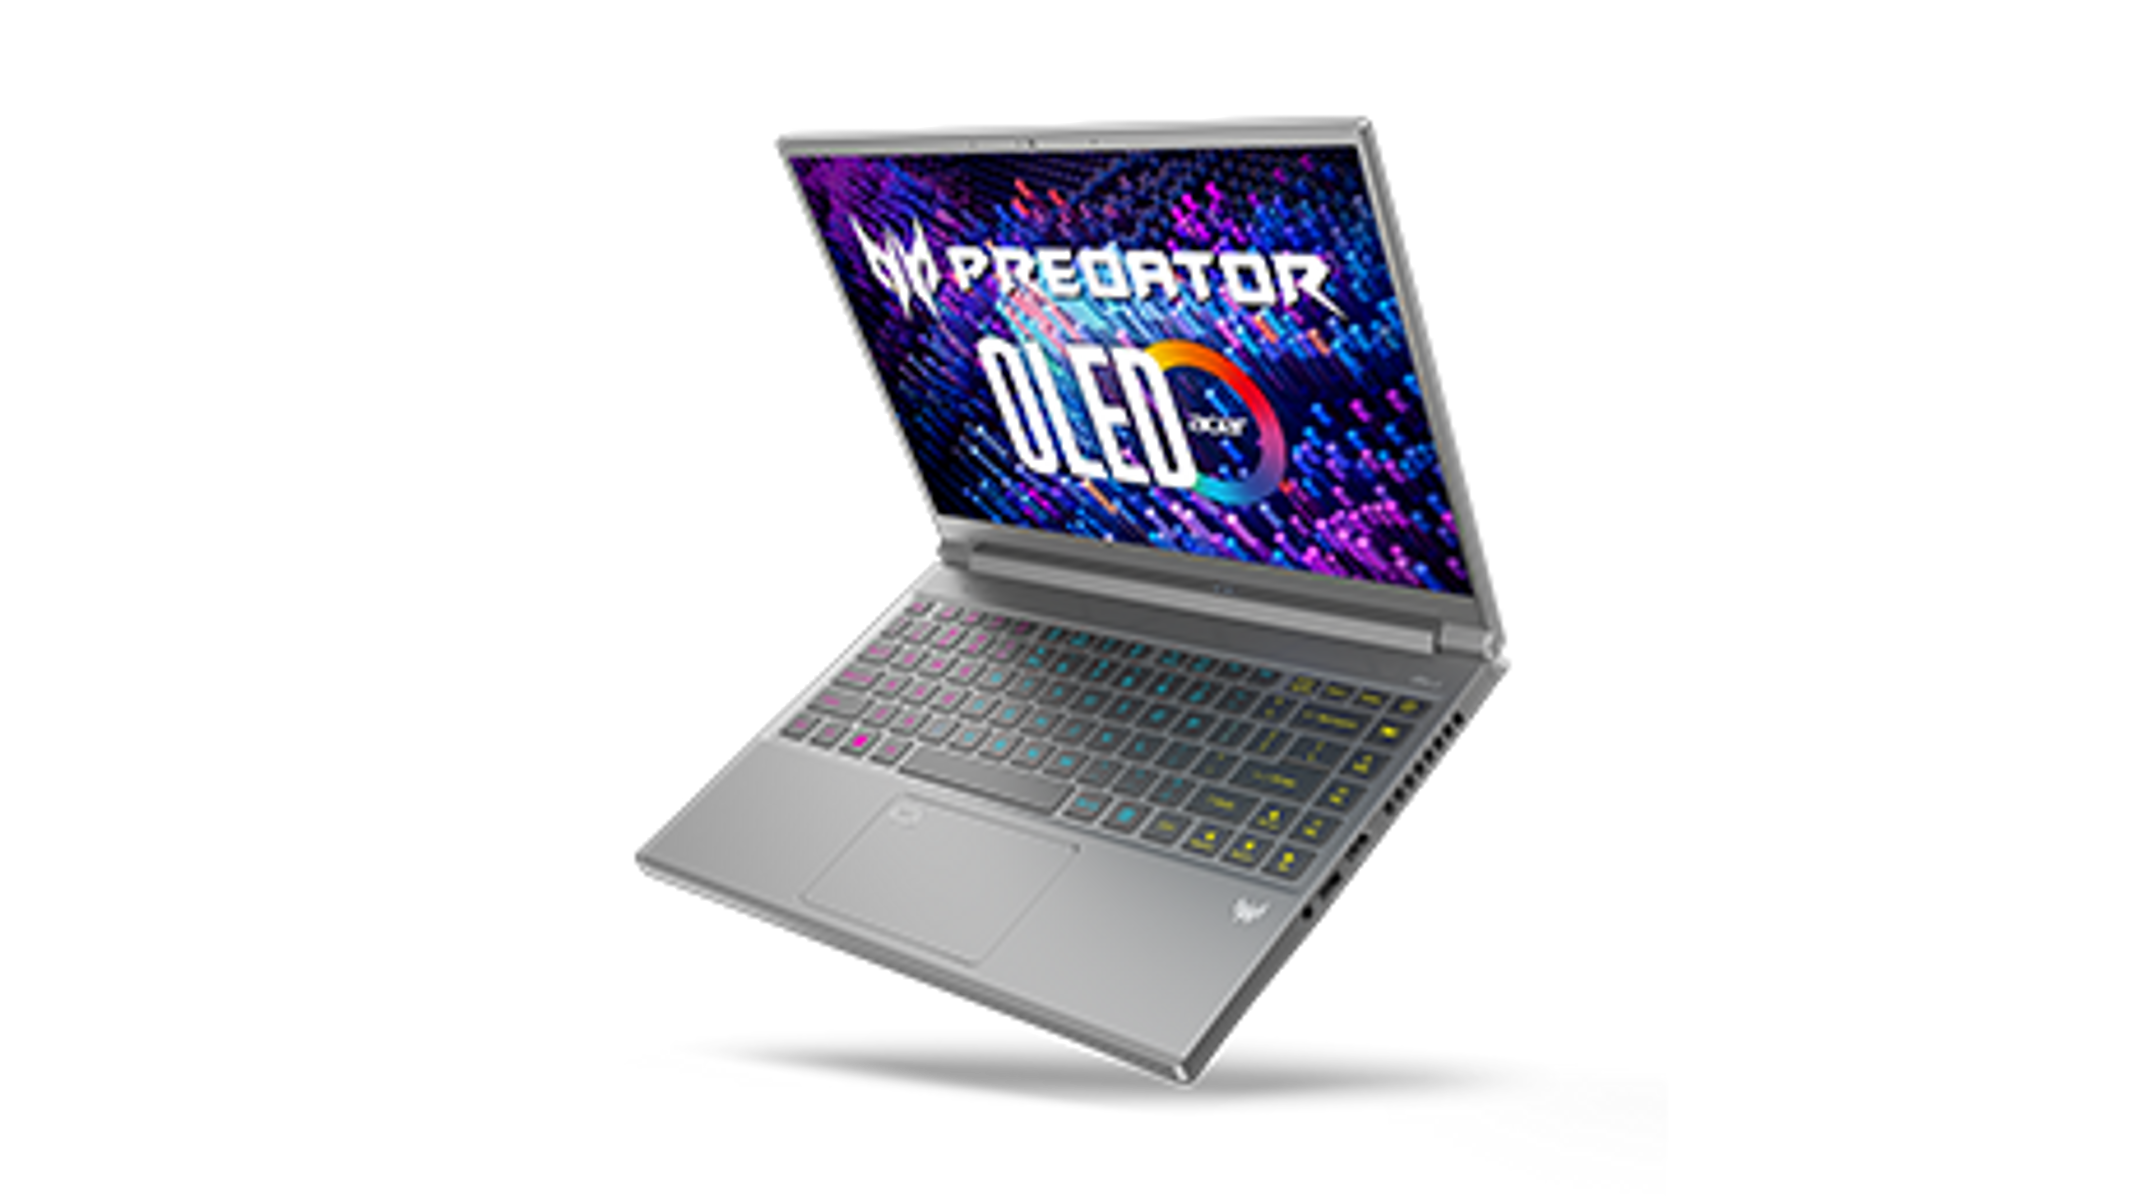 ACER S7822977, Gaming 14 Mehrfarbig RAM, GB GB Intel® Prozessor, Notebook i7 Core™ Display, mit 16 512 SSD, Zoll